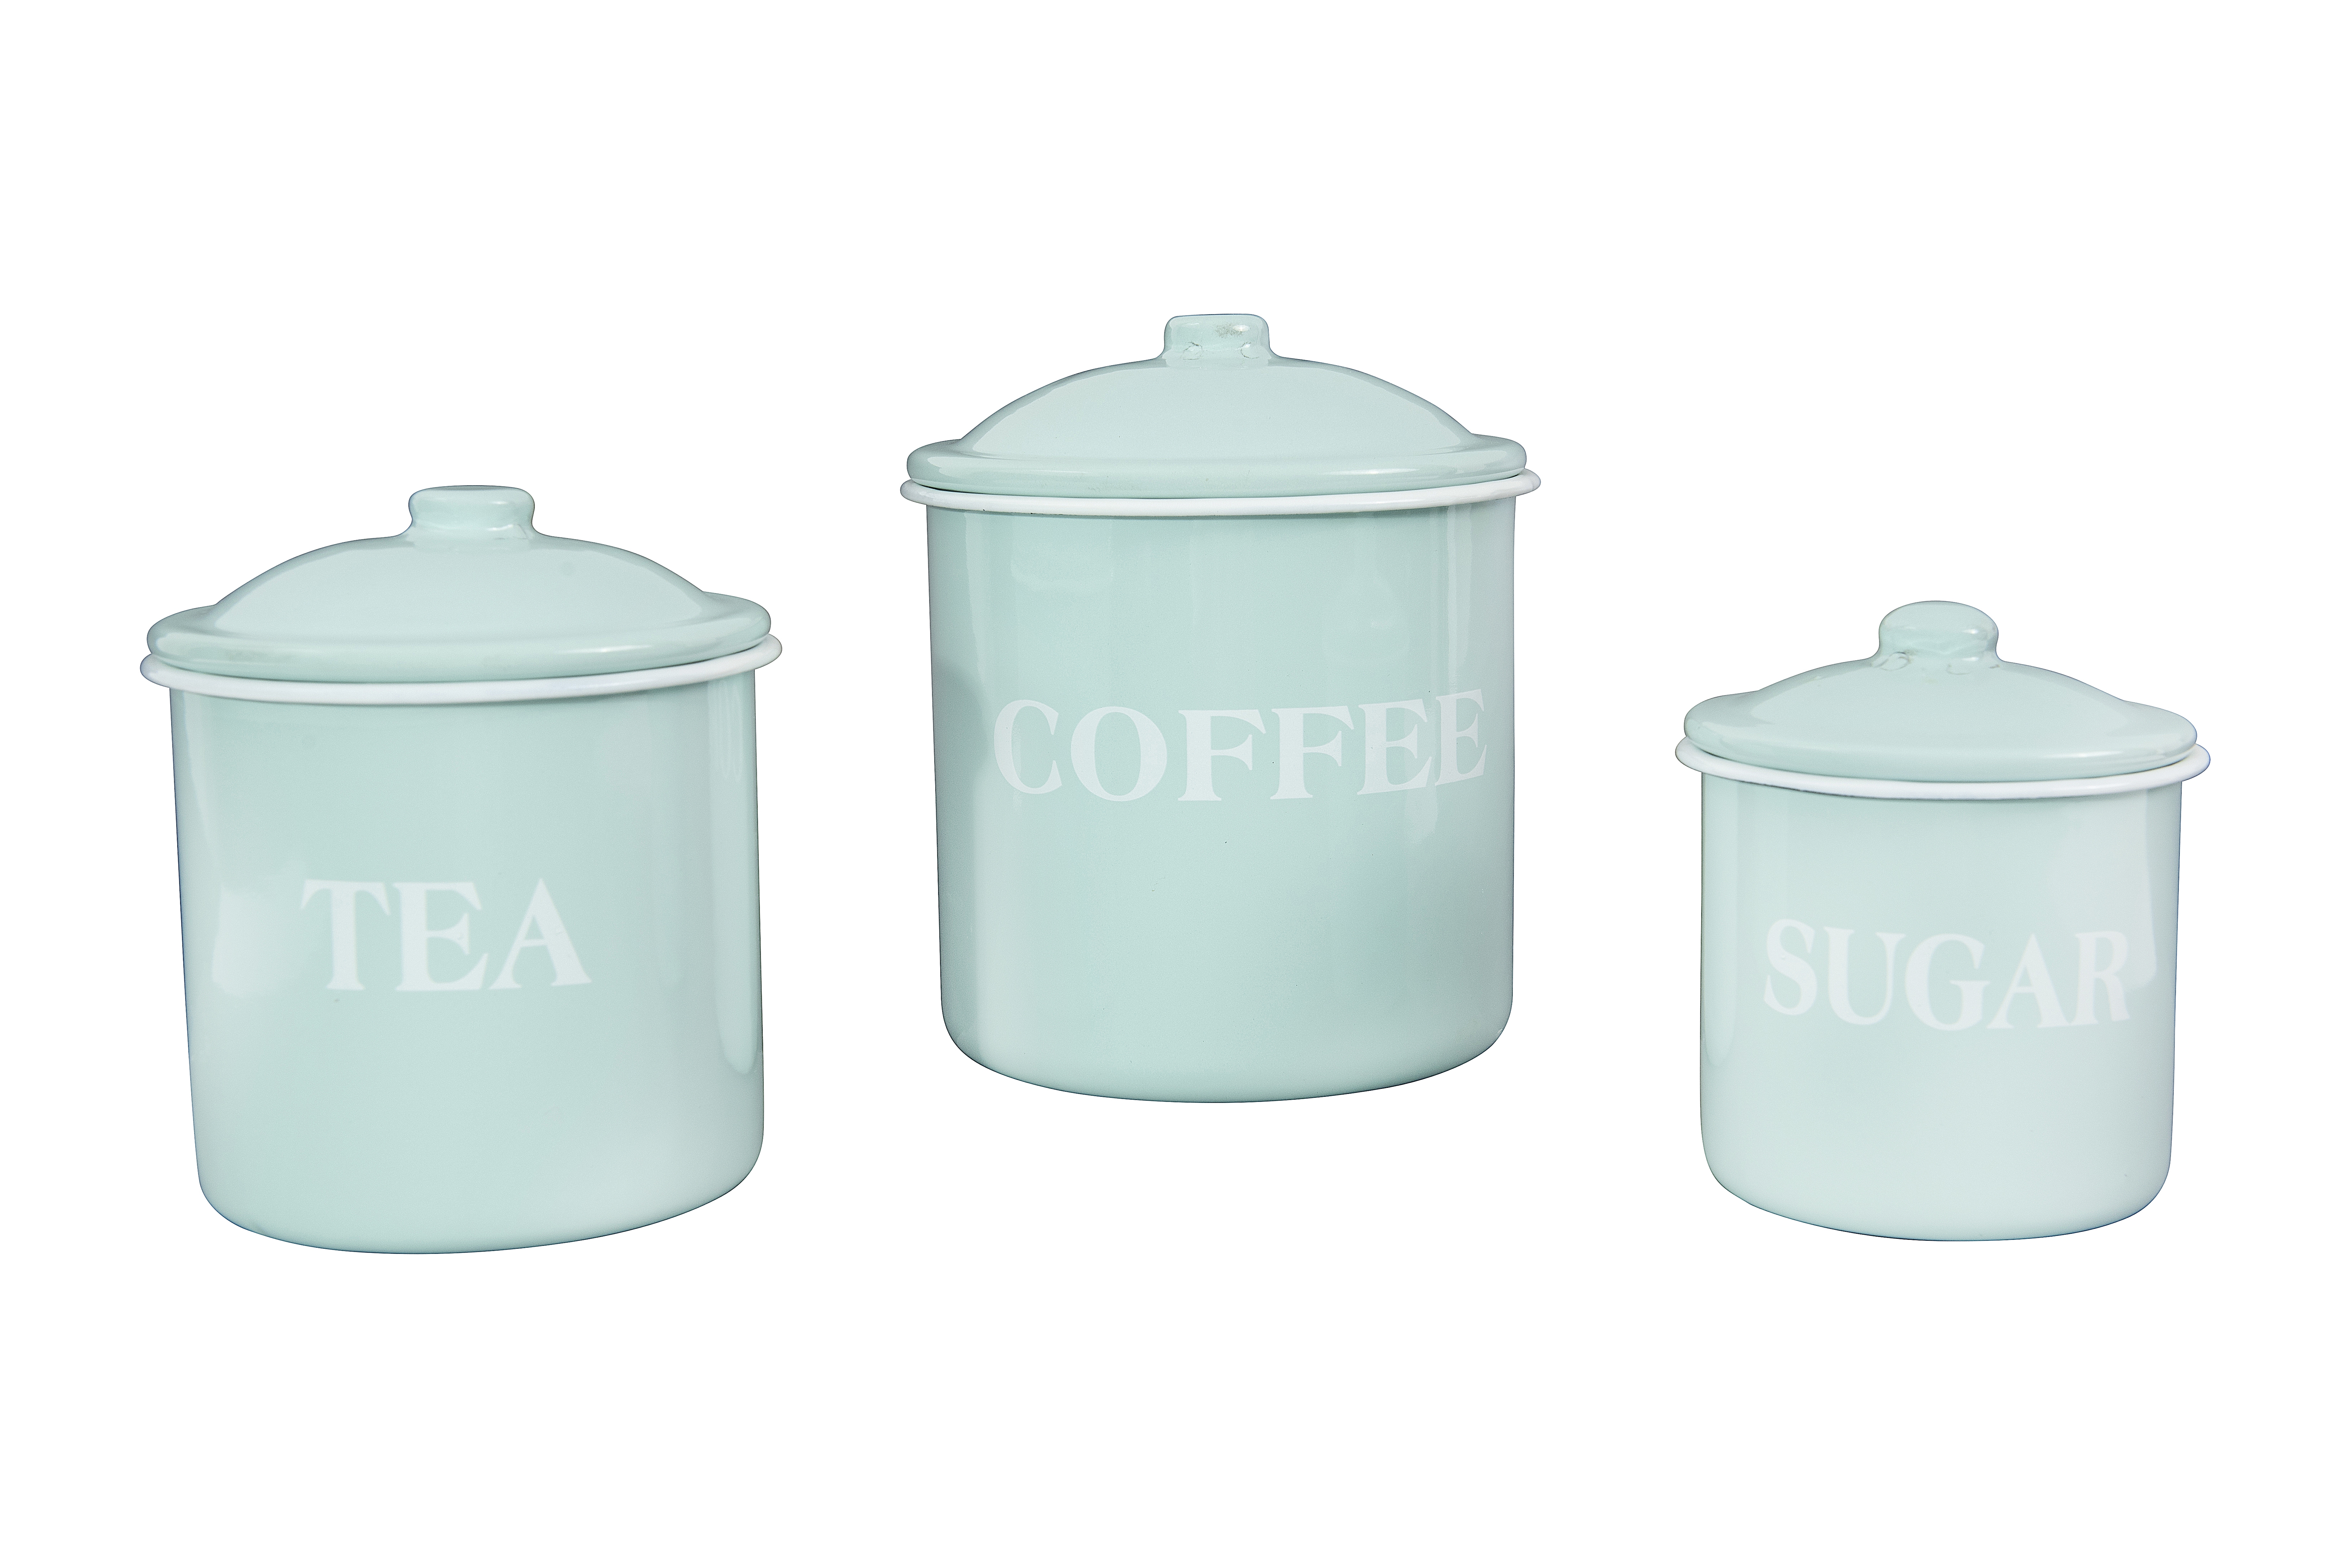 Metal Containers with Lids, "Coffee", "Tea", "Sugar" (Set of 3 Sizes/Designs) - Image 0